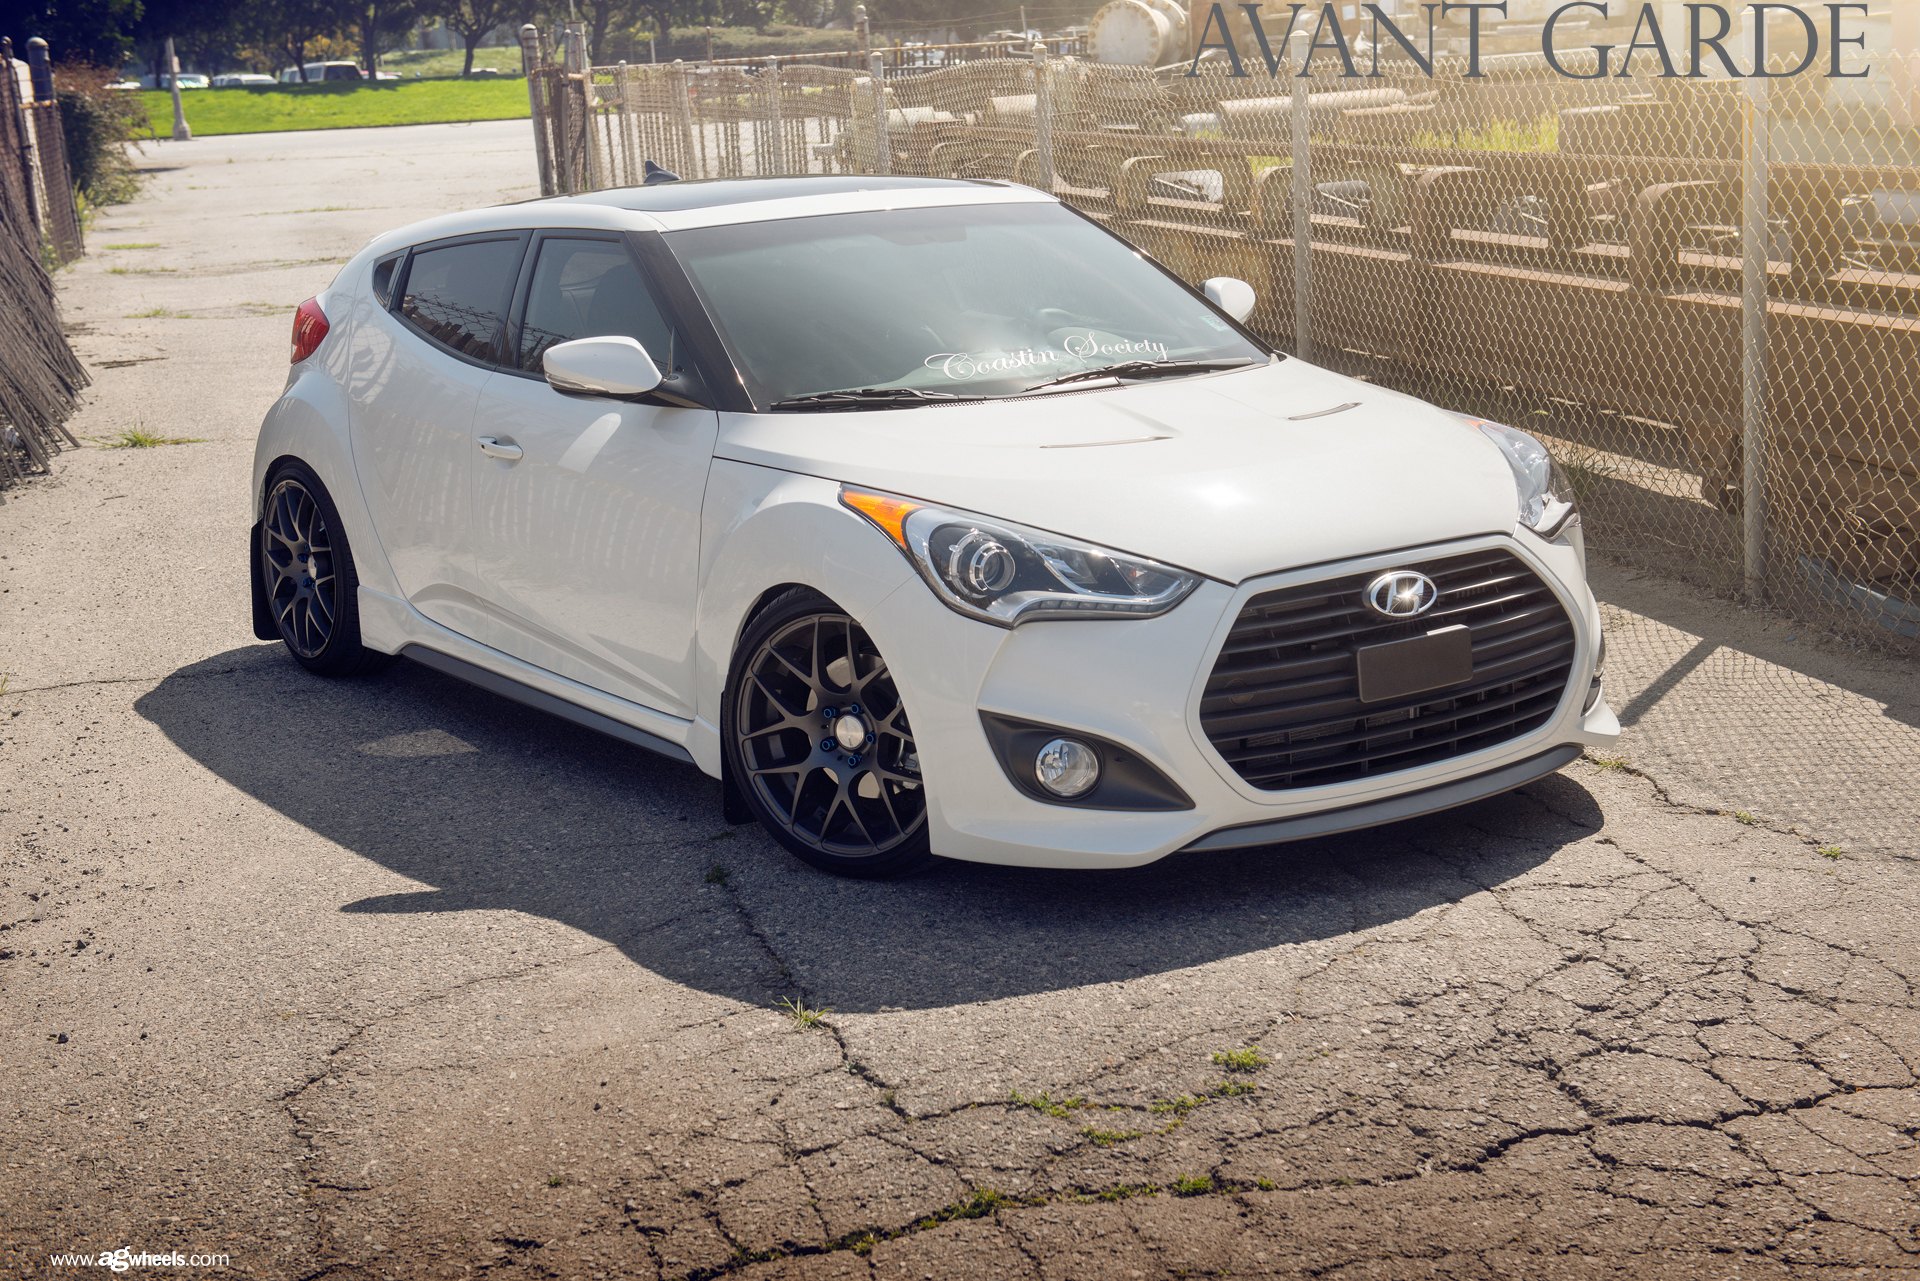 Front Bumper with Fog Lights on White Hyundai Veloster - Photo by Avant Garde Wheels